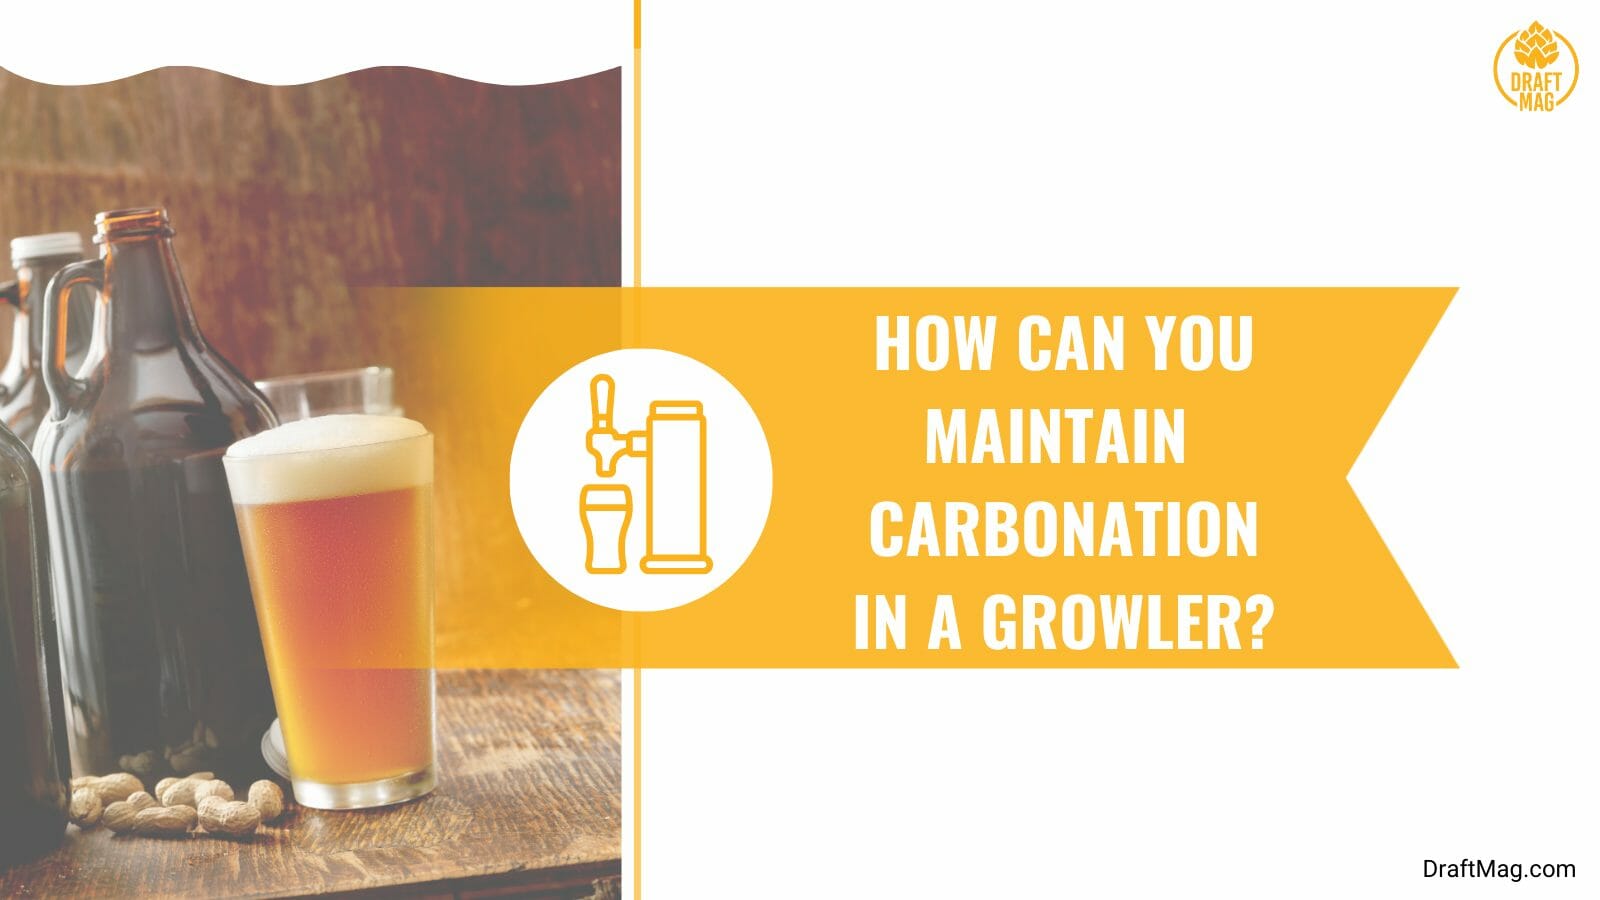 Maintain carbonation in a growler